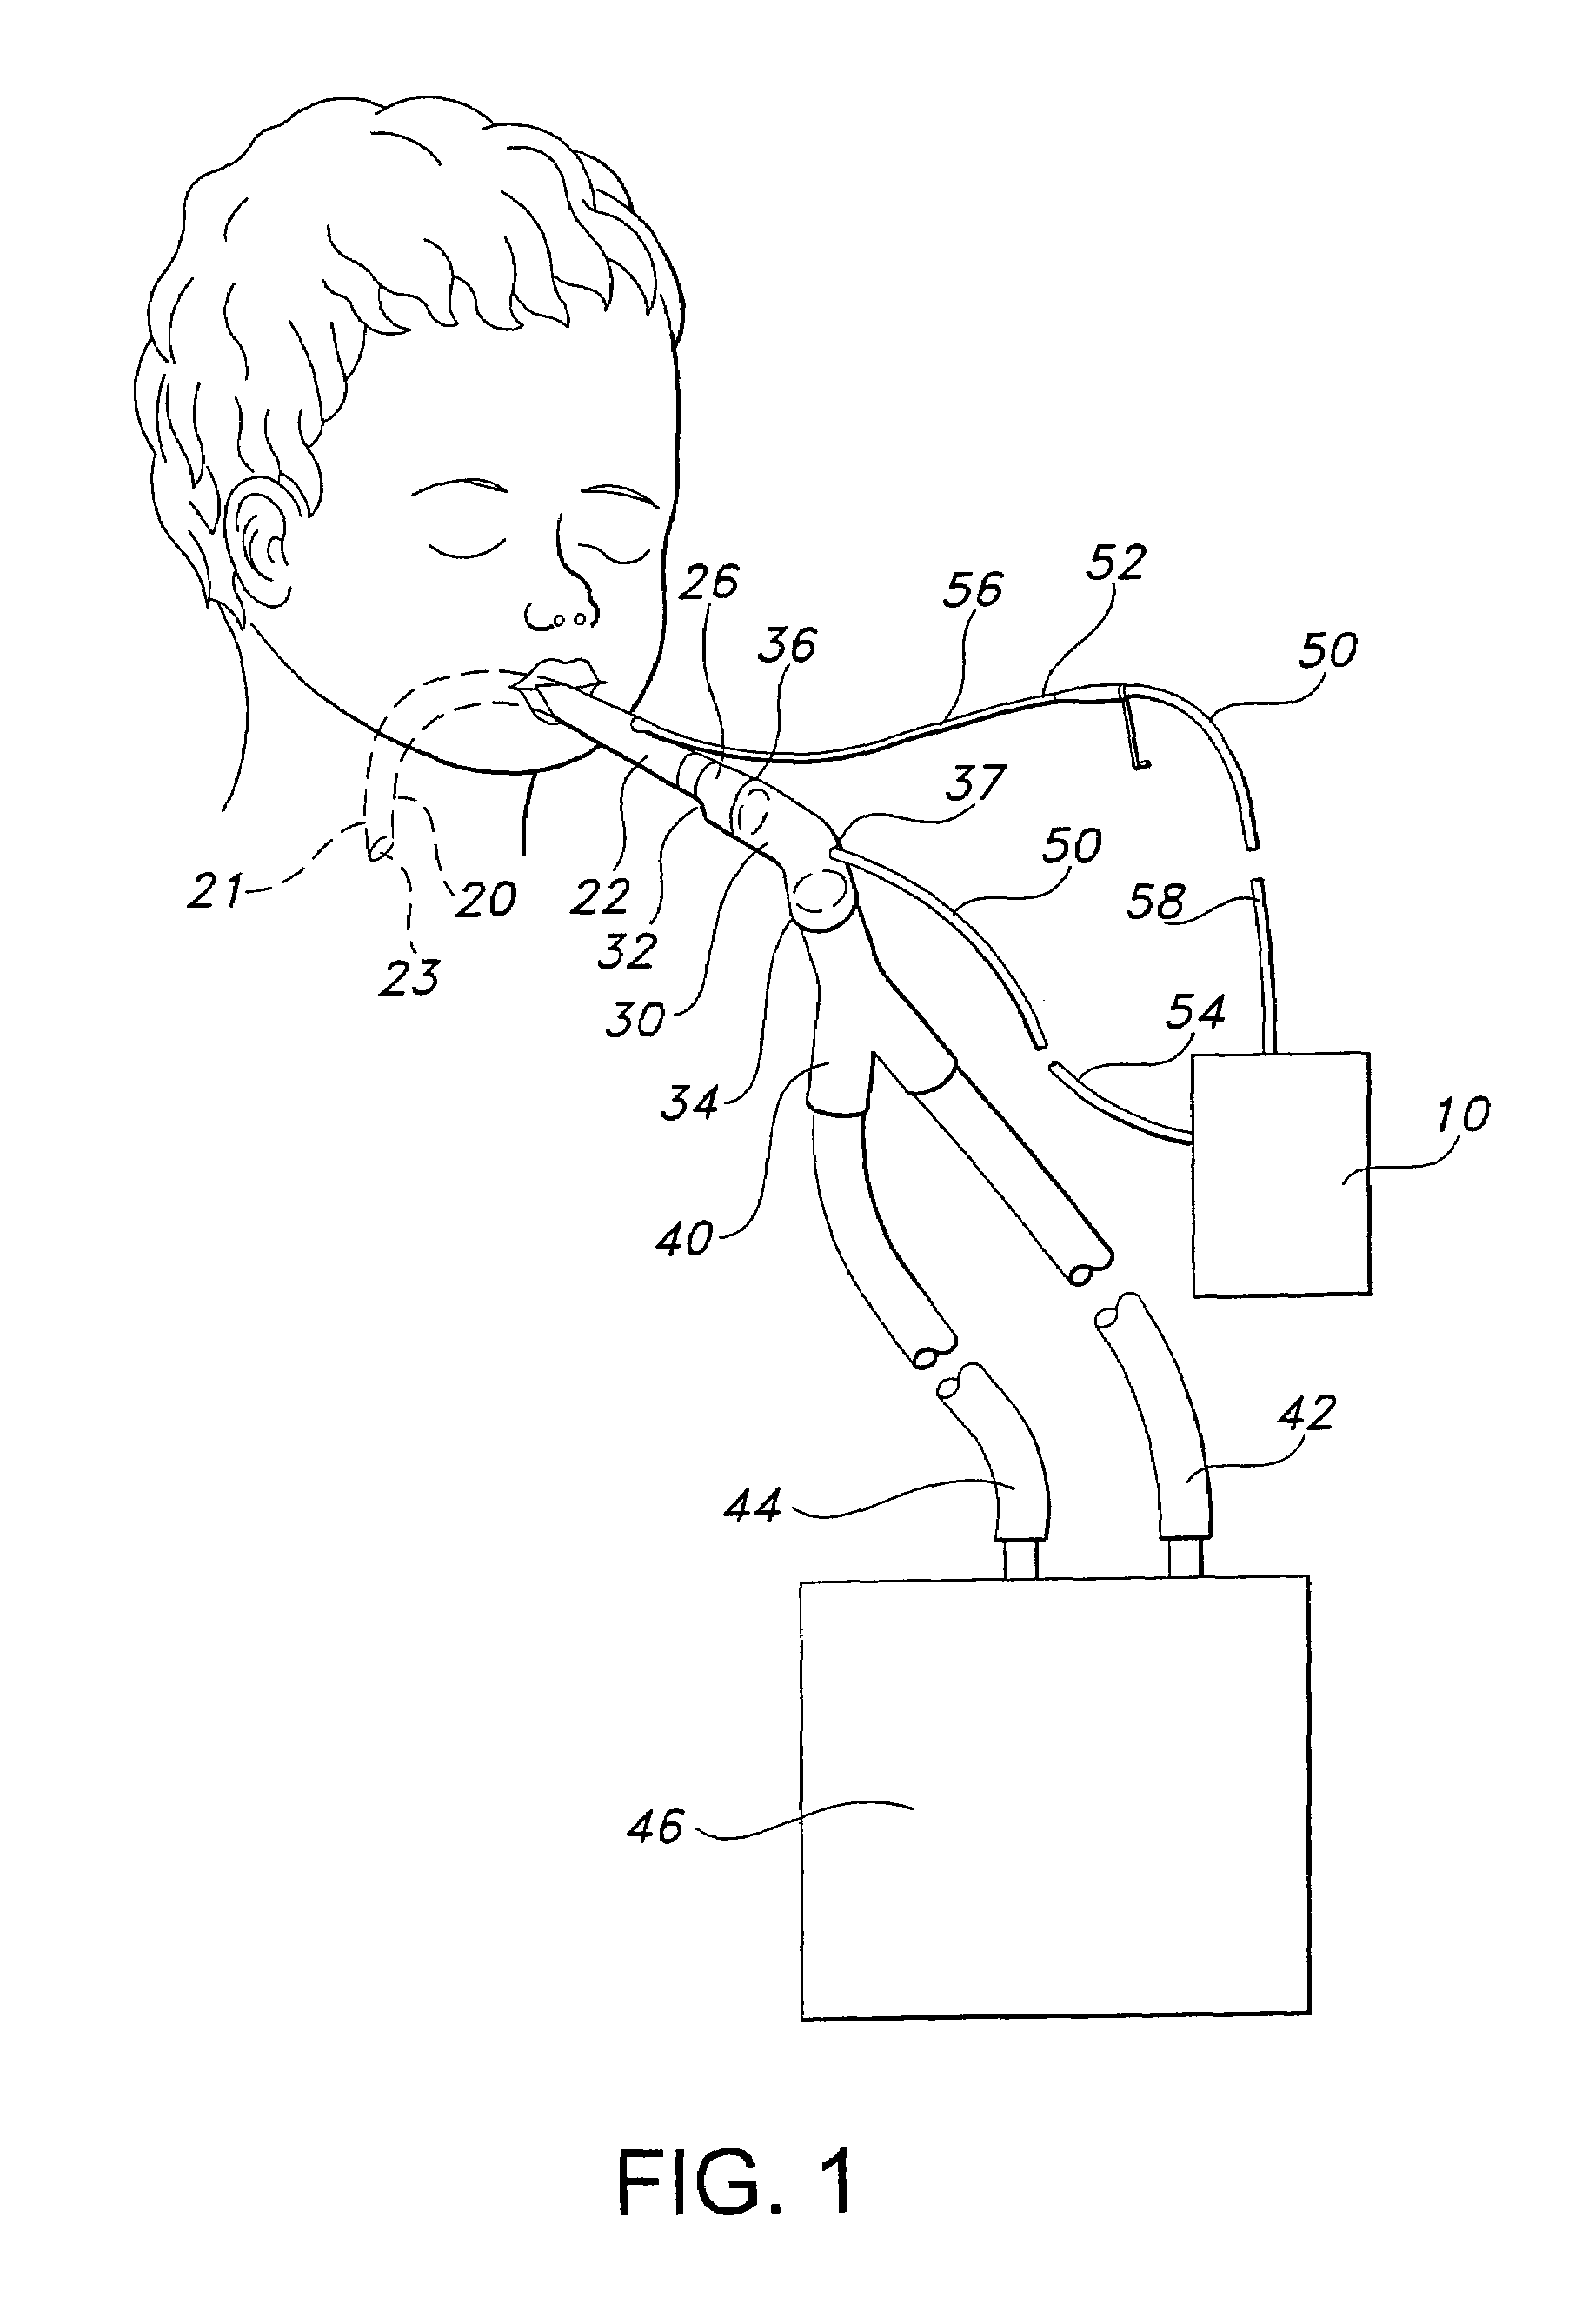 Endotracheal tube pressure monitoring system and method of controlling same